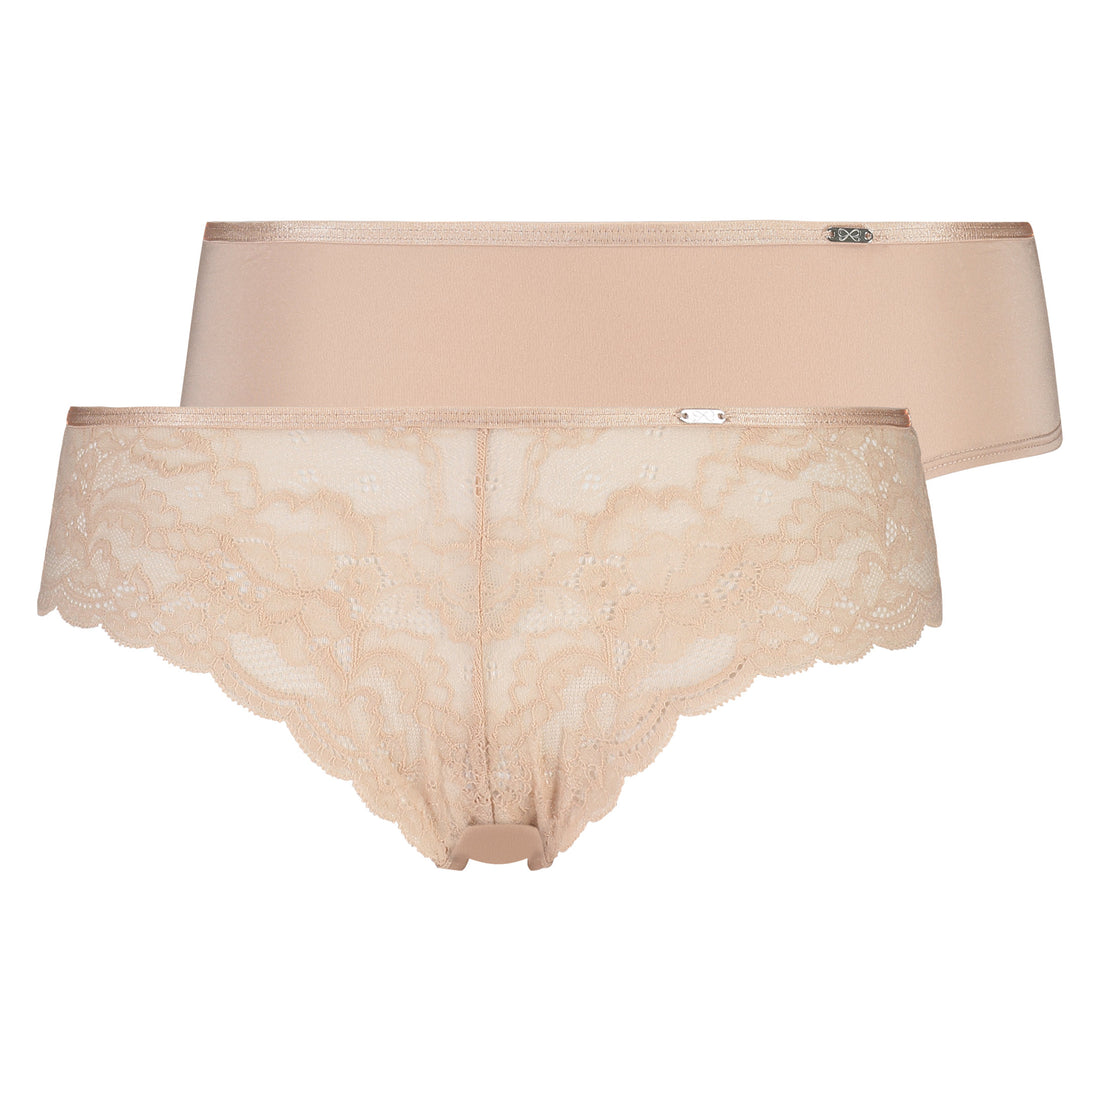 2 Pack Angie Brasilian Briefs_136476_Rugby Tan_01